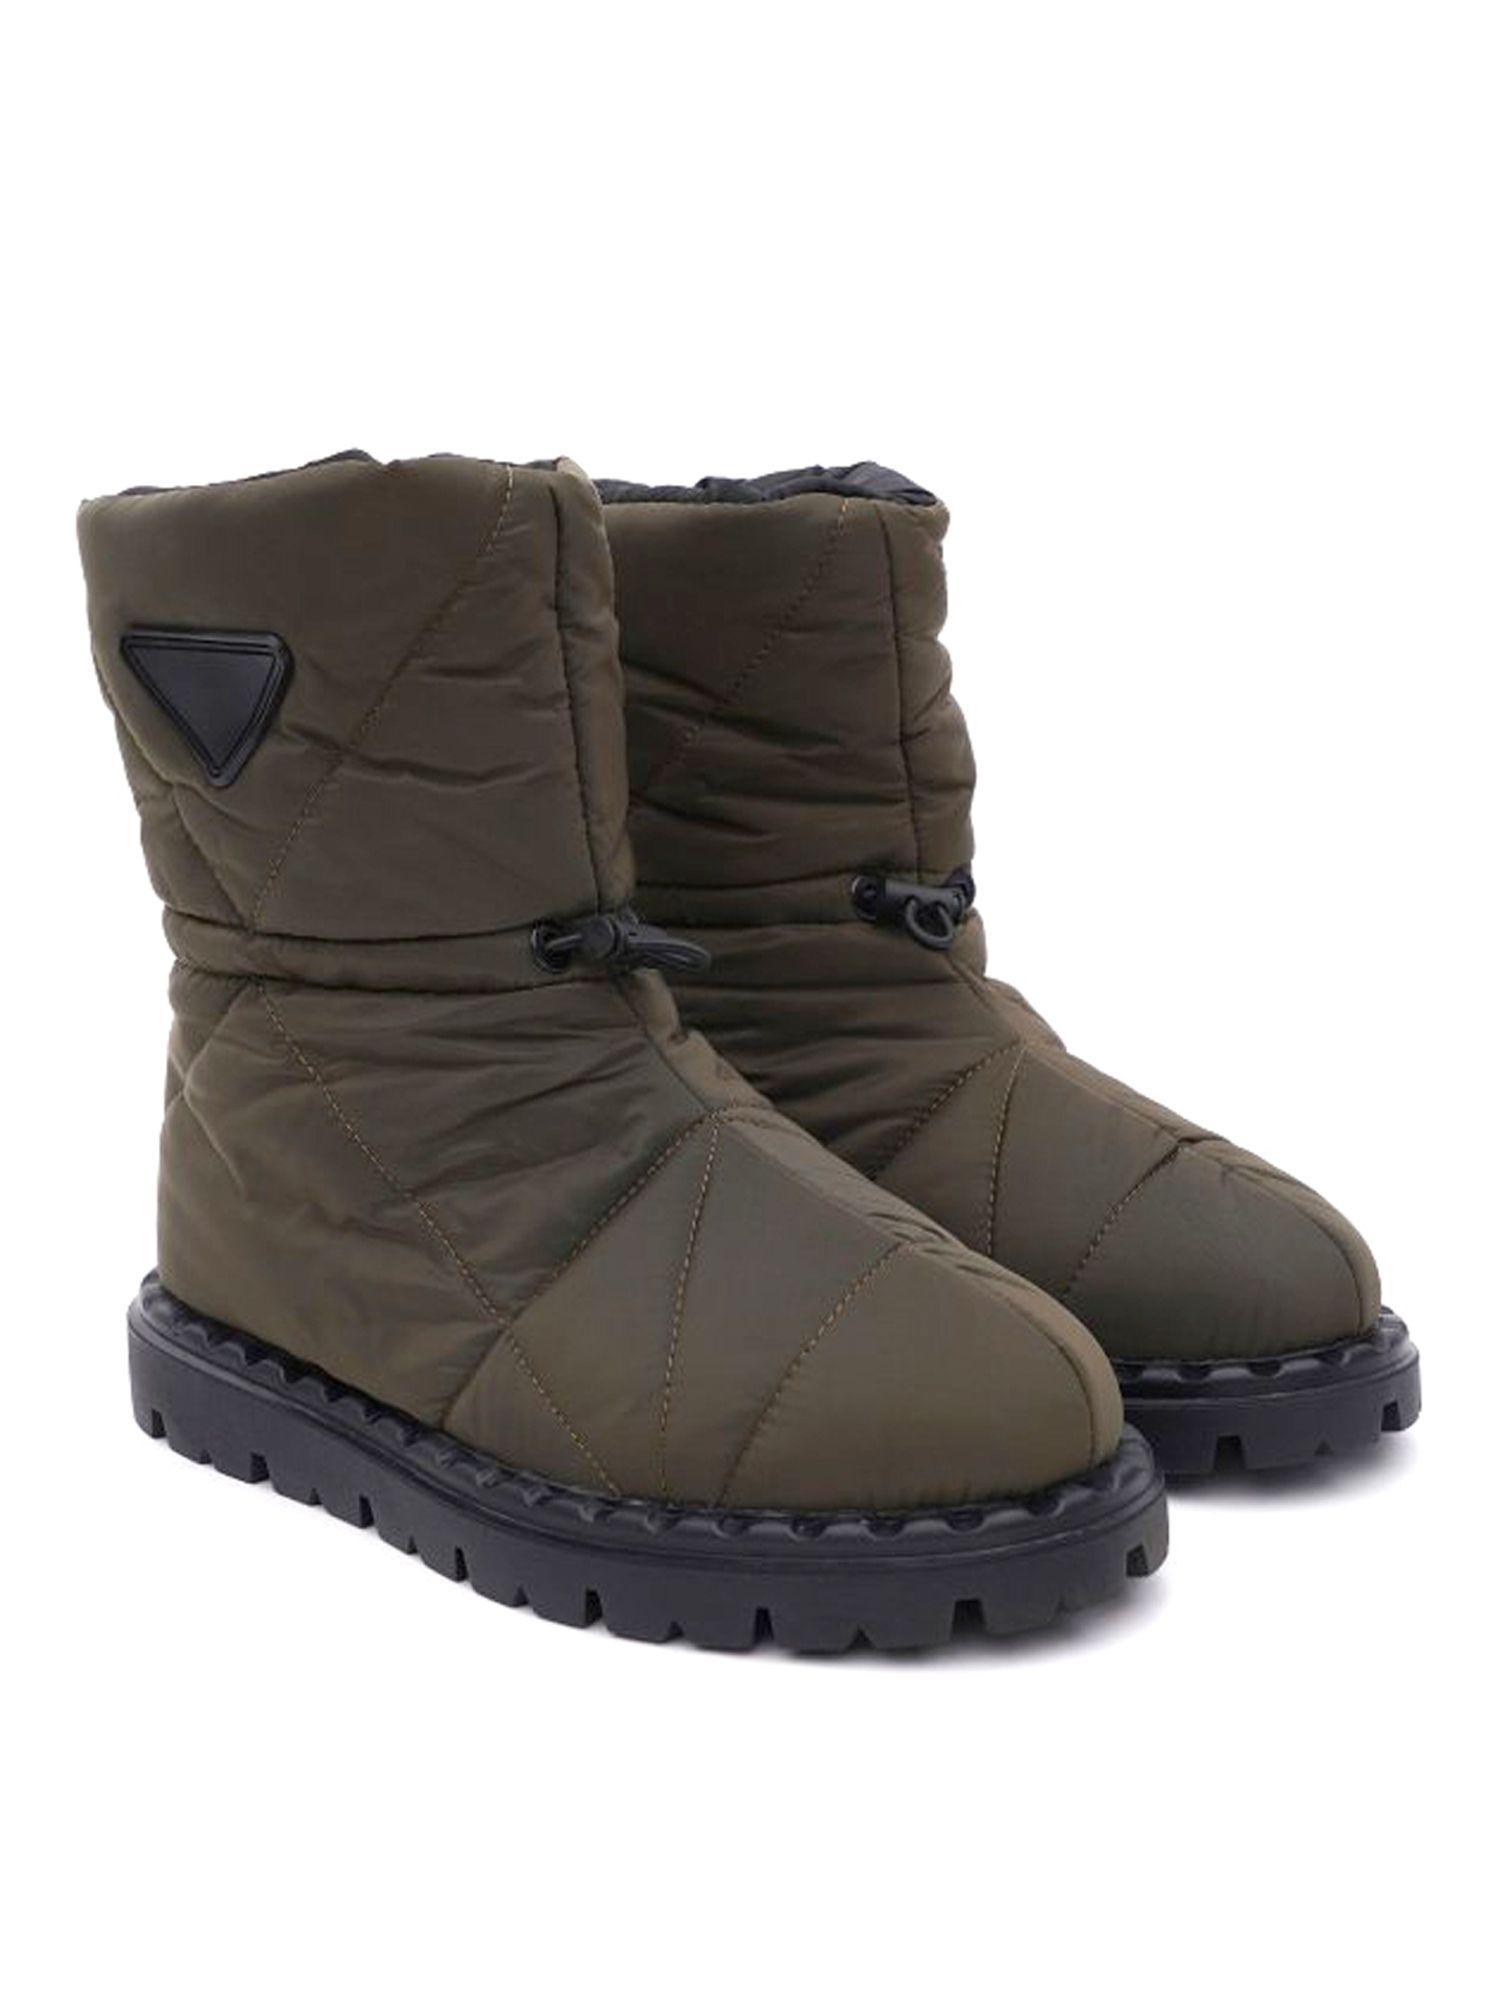 solid-military-green-girls-winter-snow-boots